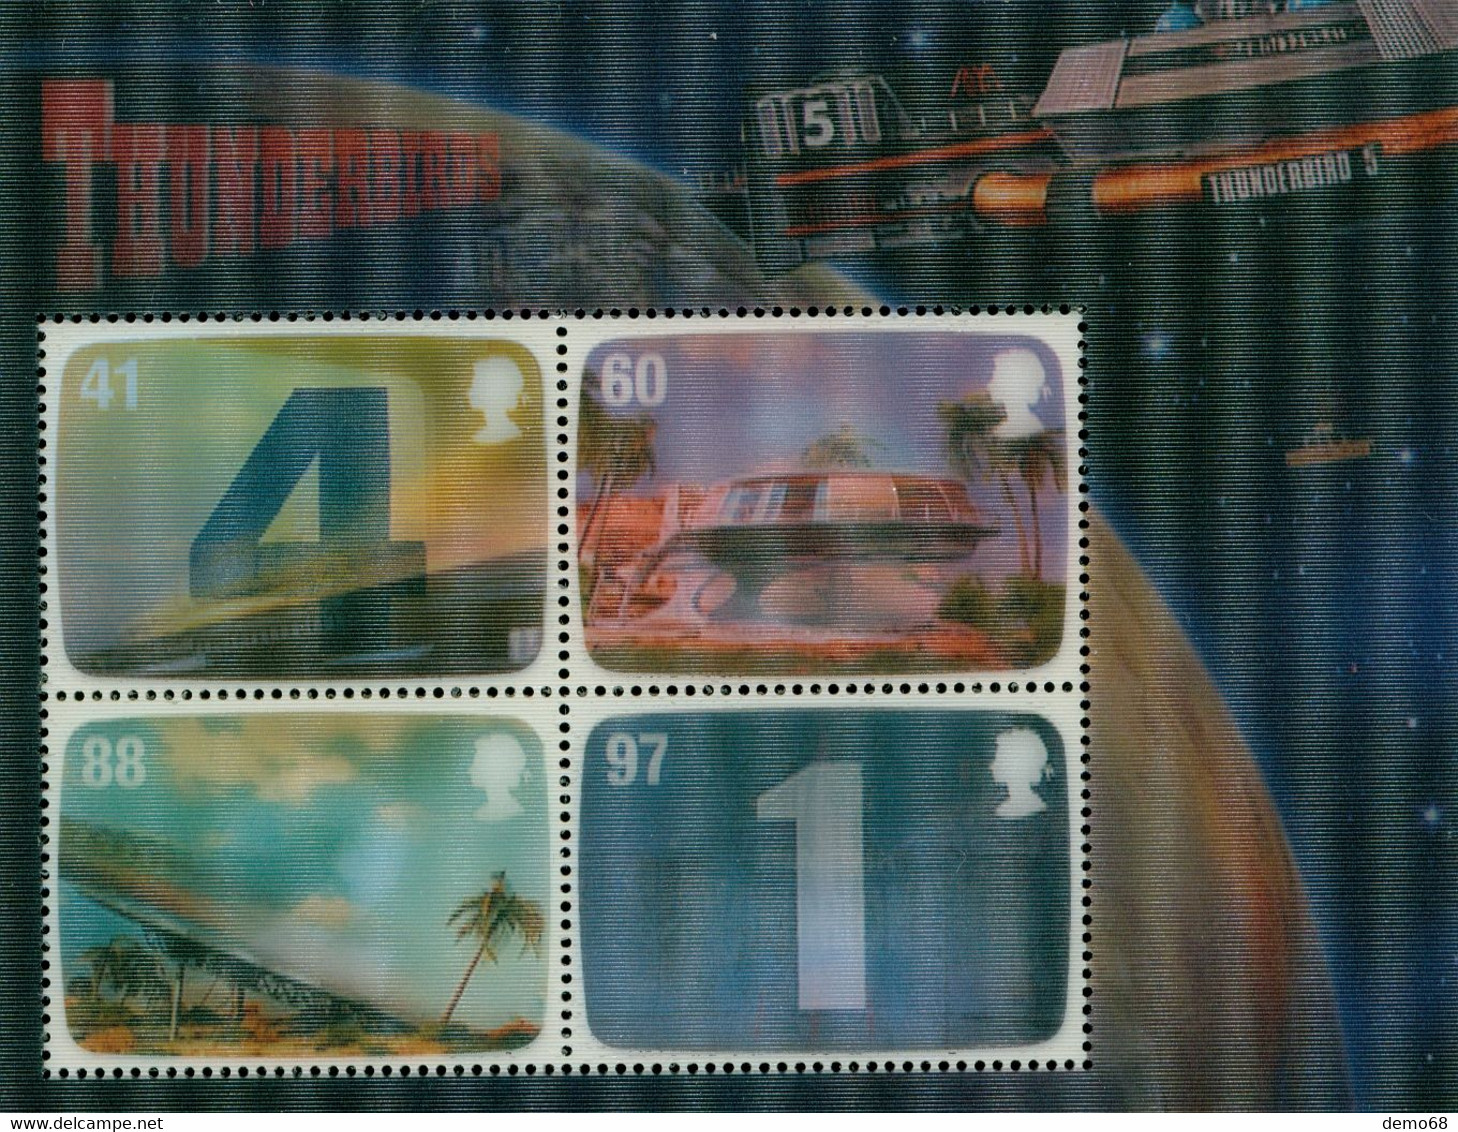 Stamp Timbre England Great Britain  Thunderbirds Gerry Anderson GB Feuillet Neuf 4 Et 6 Timbre S Royal Mail Mint Stamps - Collections